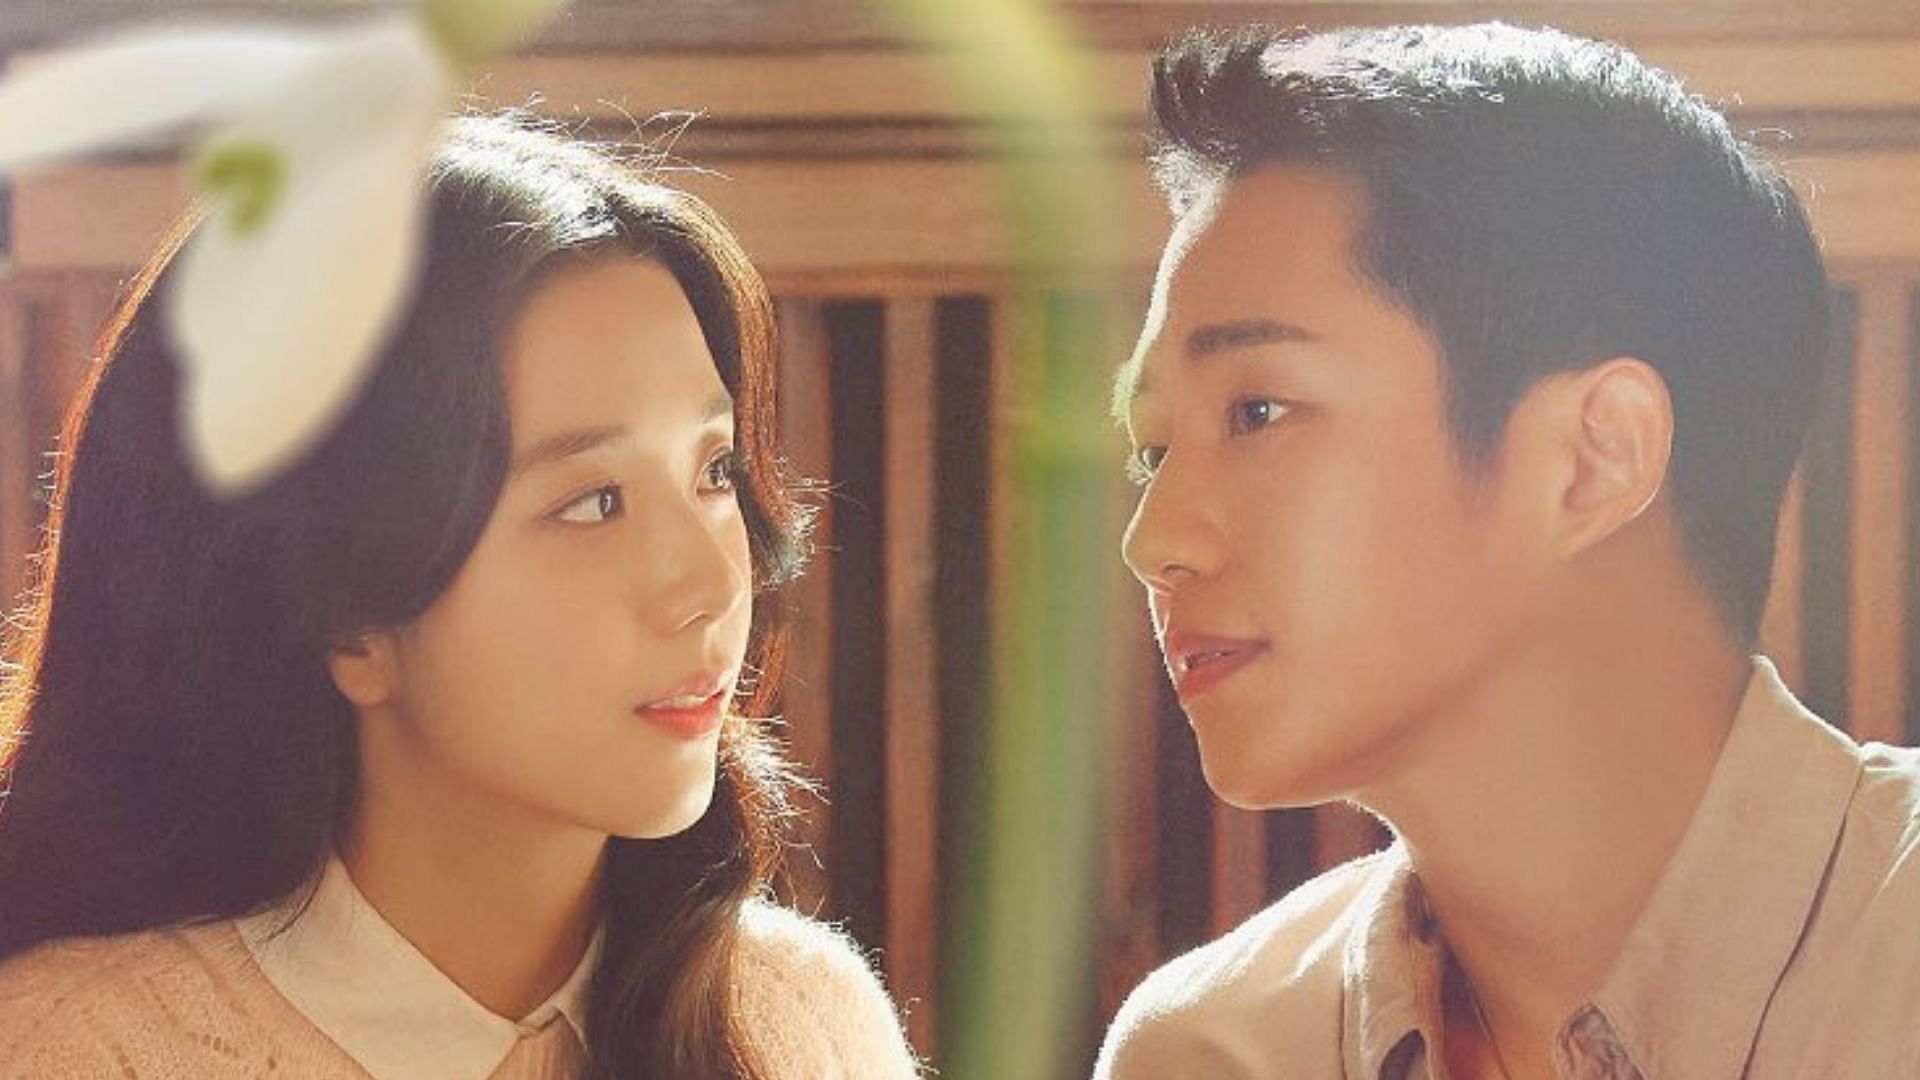 A still of Jung Hae In and Jisoo in Snowdrop promo (Image via jtbcdrama)